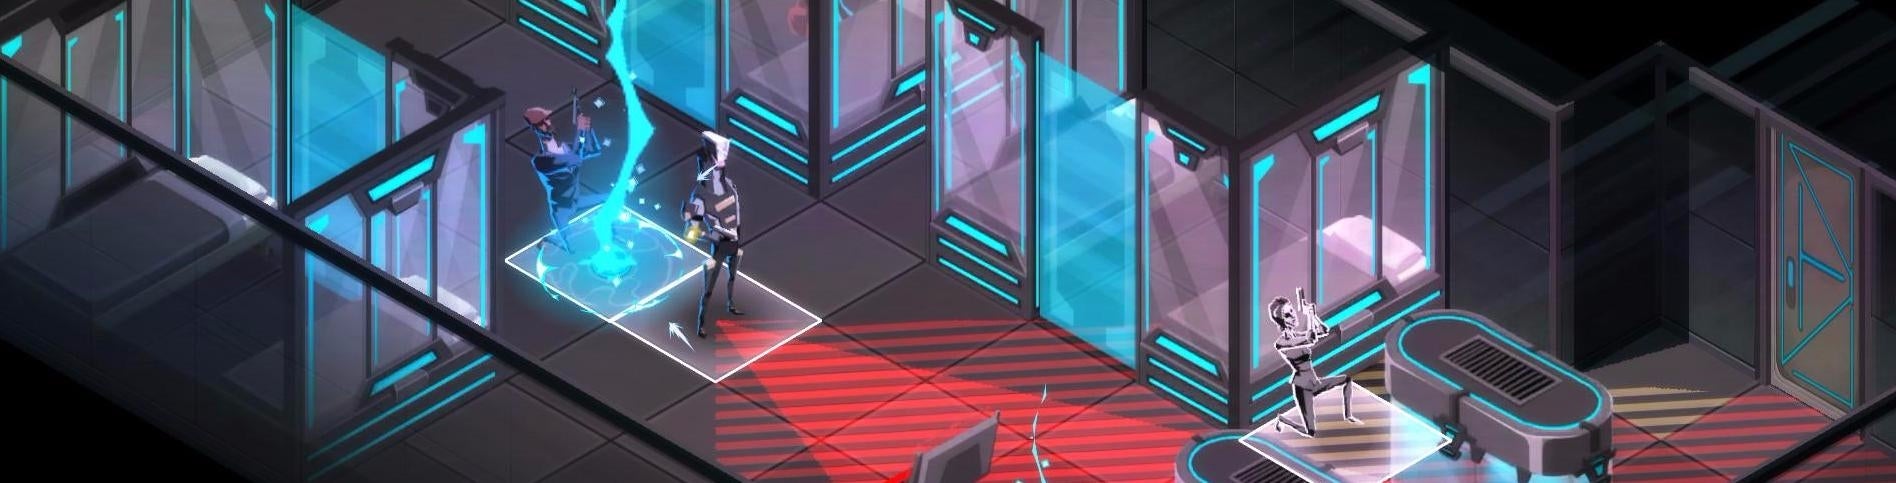 Image for Watch: Johnny plays Invisible, Inc. for the first time, ambushes many.